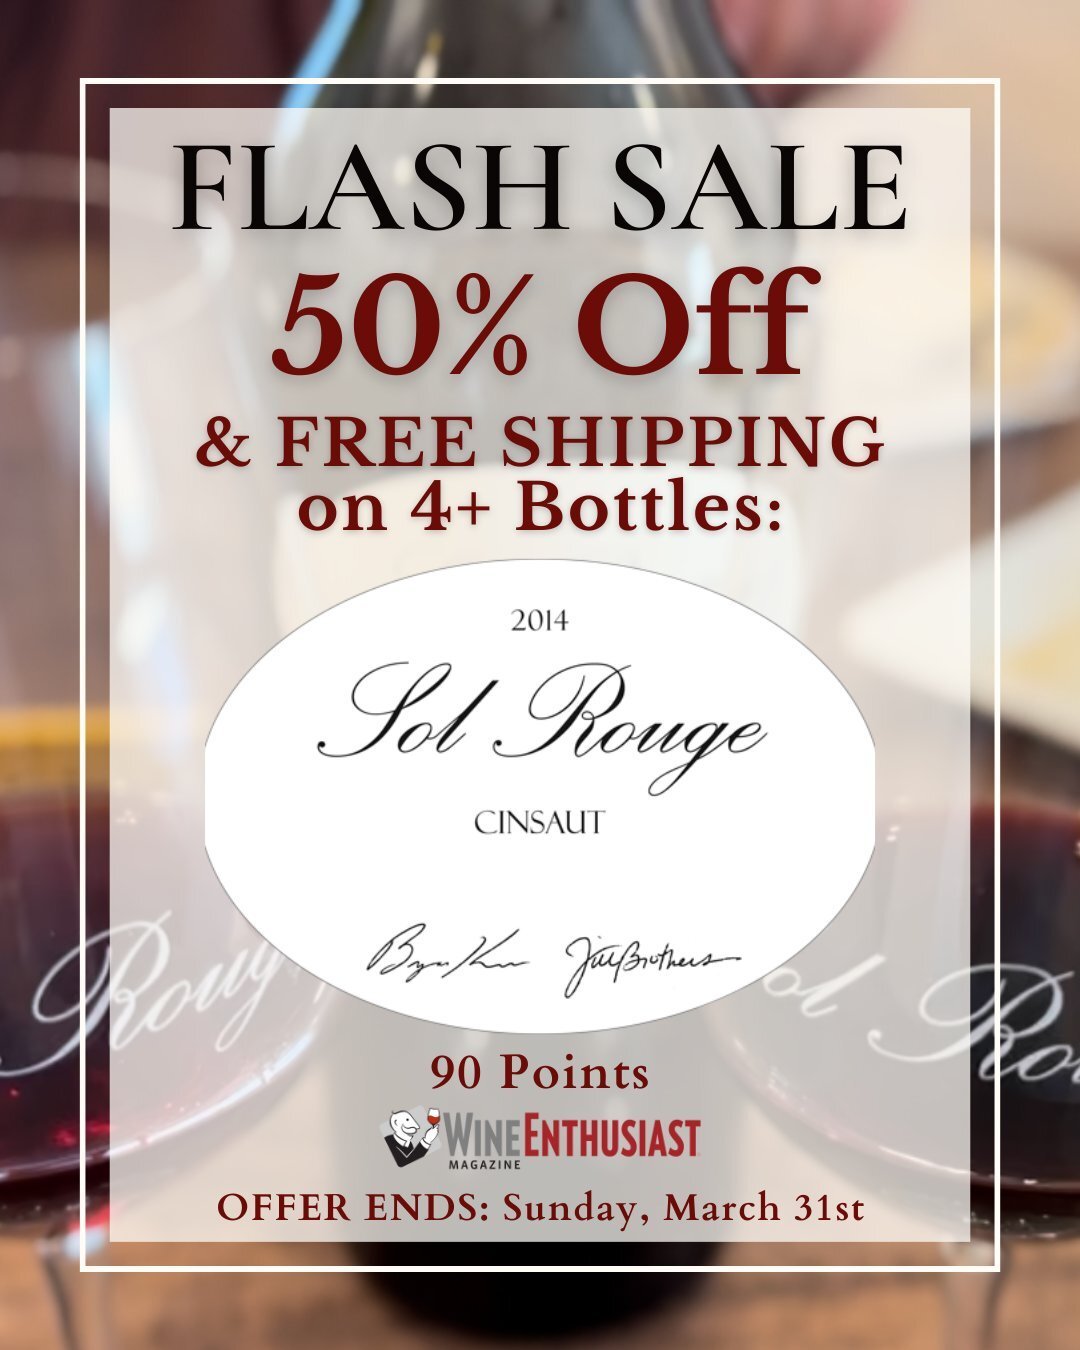 LAST DAY to get our 2014 Sol Rouge Cinsaut, rated 90 points by Wine Enthusiast Magazine, for 50% OFF a 4 bottle set + FREE ground shipping. Hurry, offer ends Sunday, March 31rd. Order today at https://www.solrouge.com/flash-sale-50-off